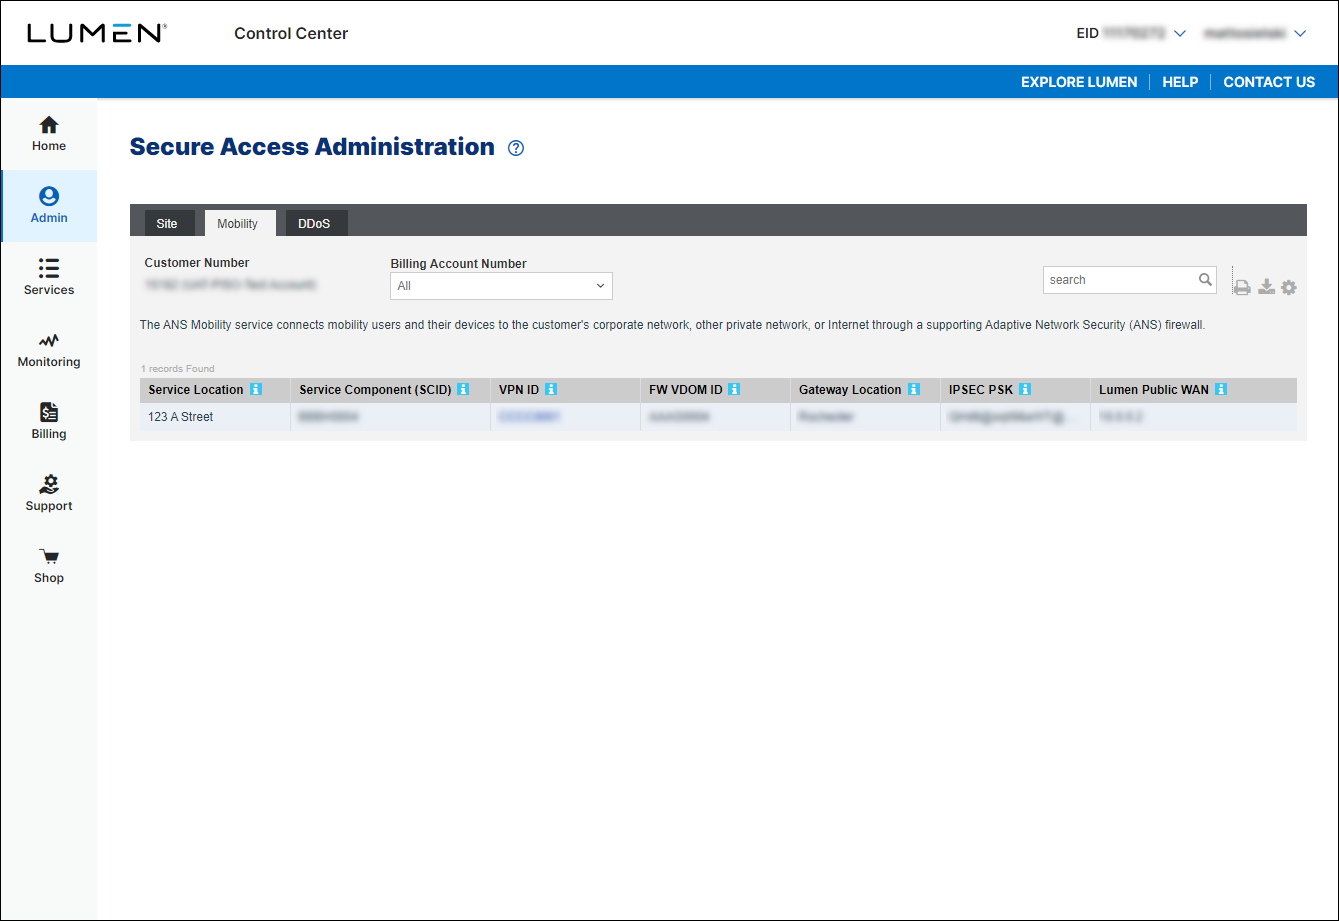 Secure Access Administration (showing Mobility tab)